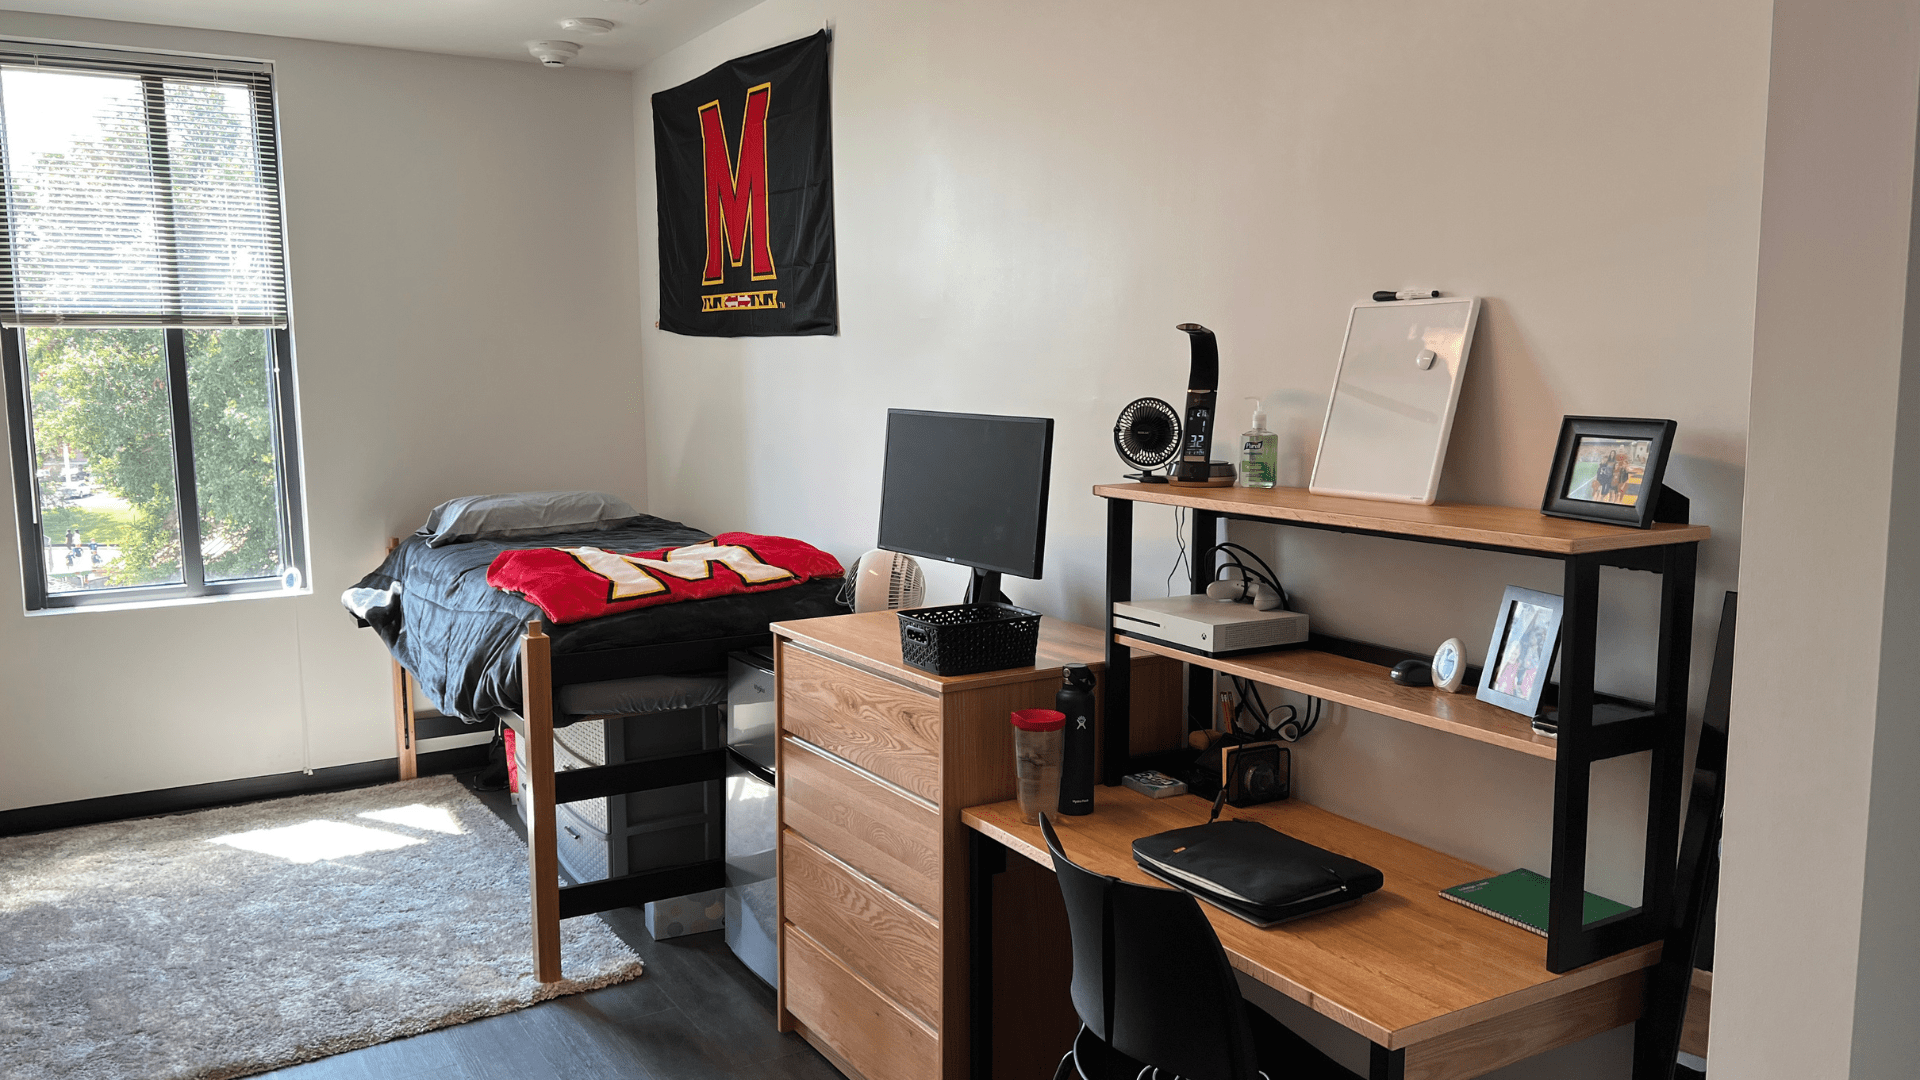 residence hall room decorated with Maryland gear